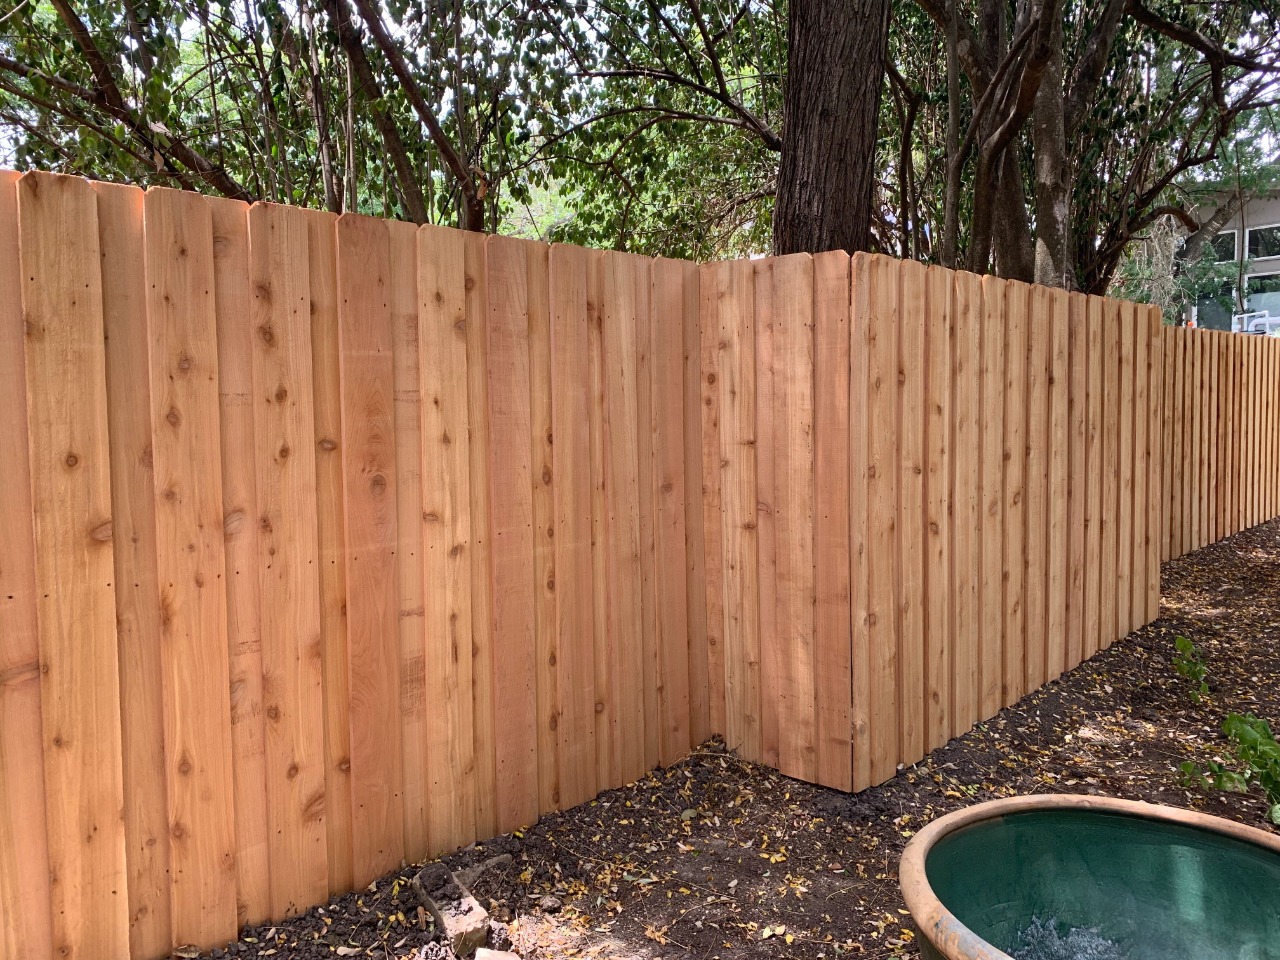 Six foot board on board privacy fence built around existing tree